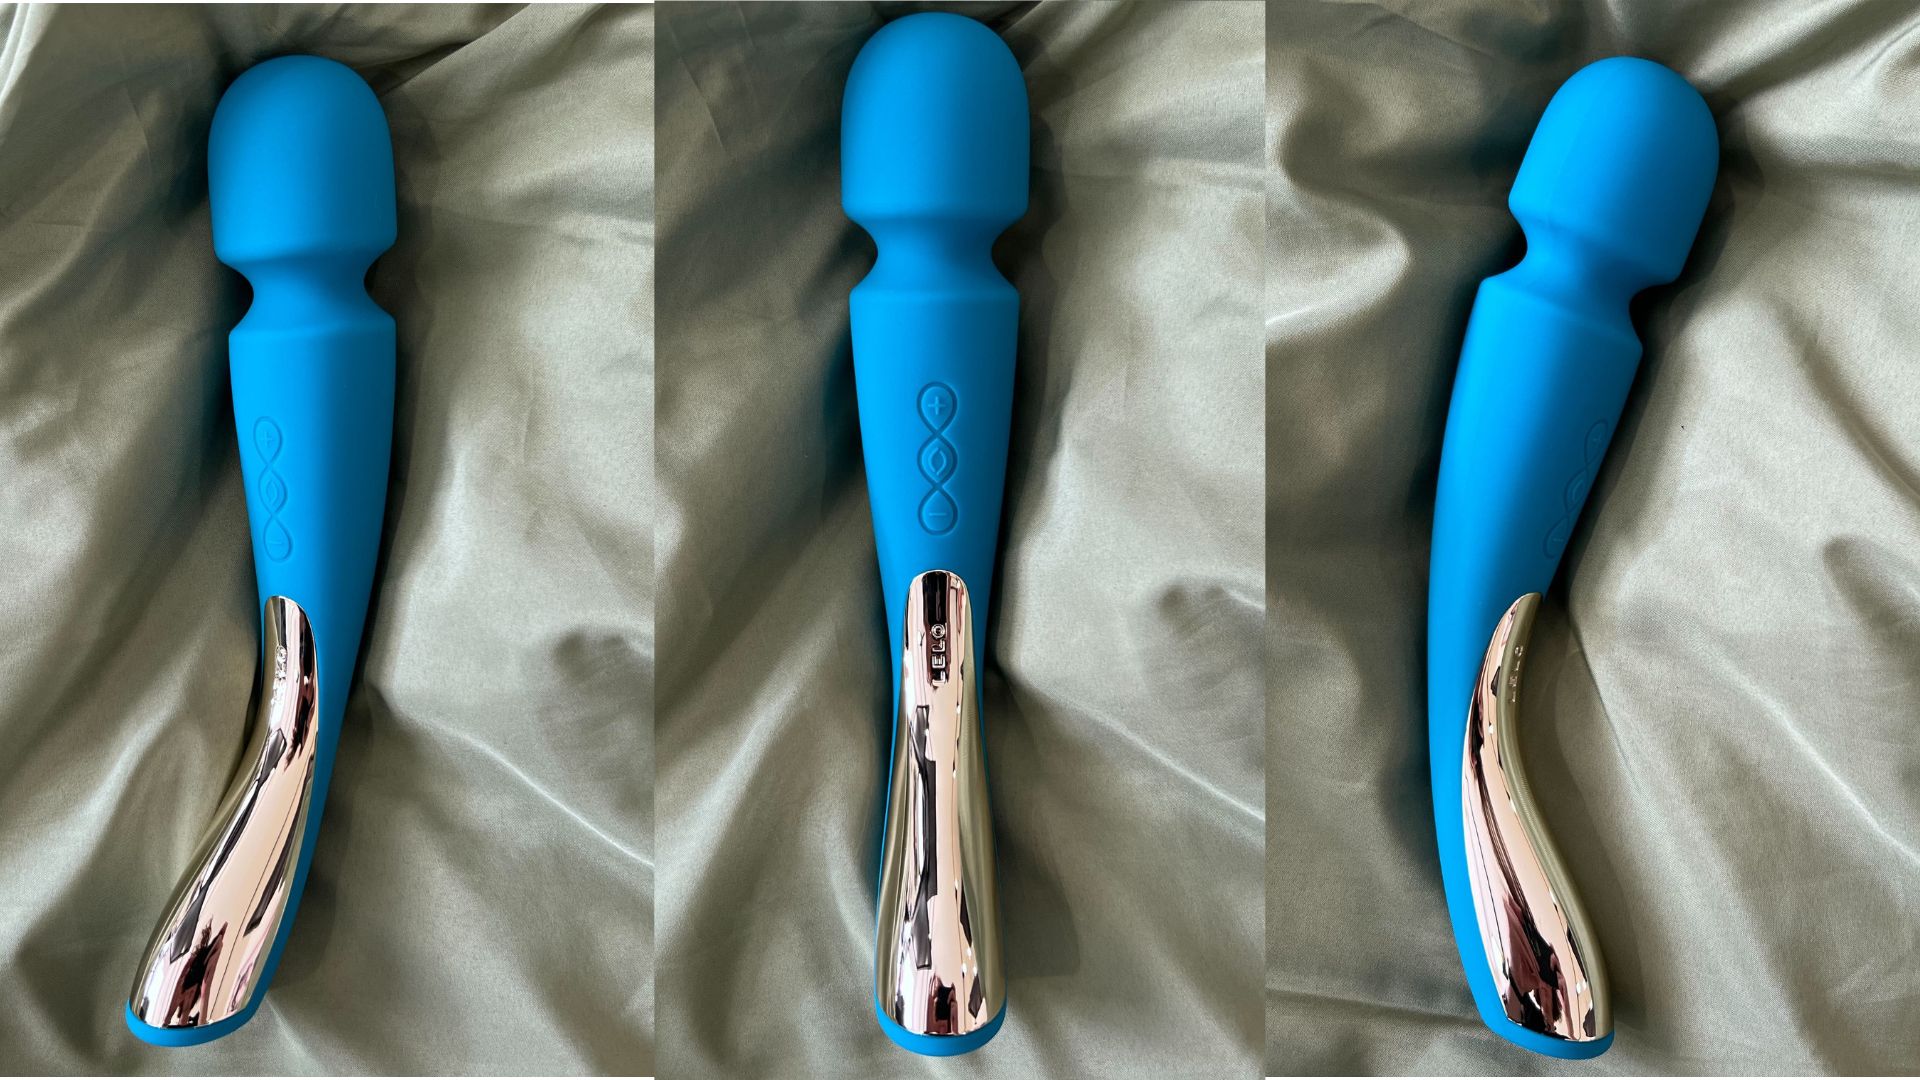 The LELO Smart Wand 2, as tested by woman&home, on satin green material from various angles